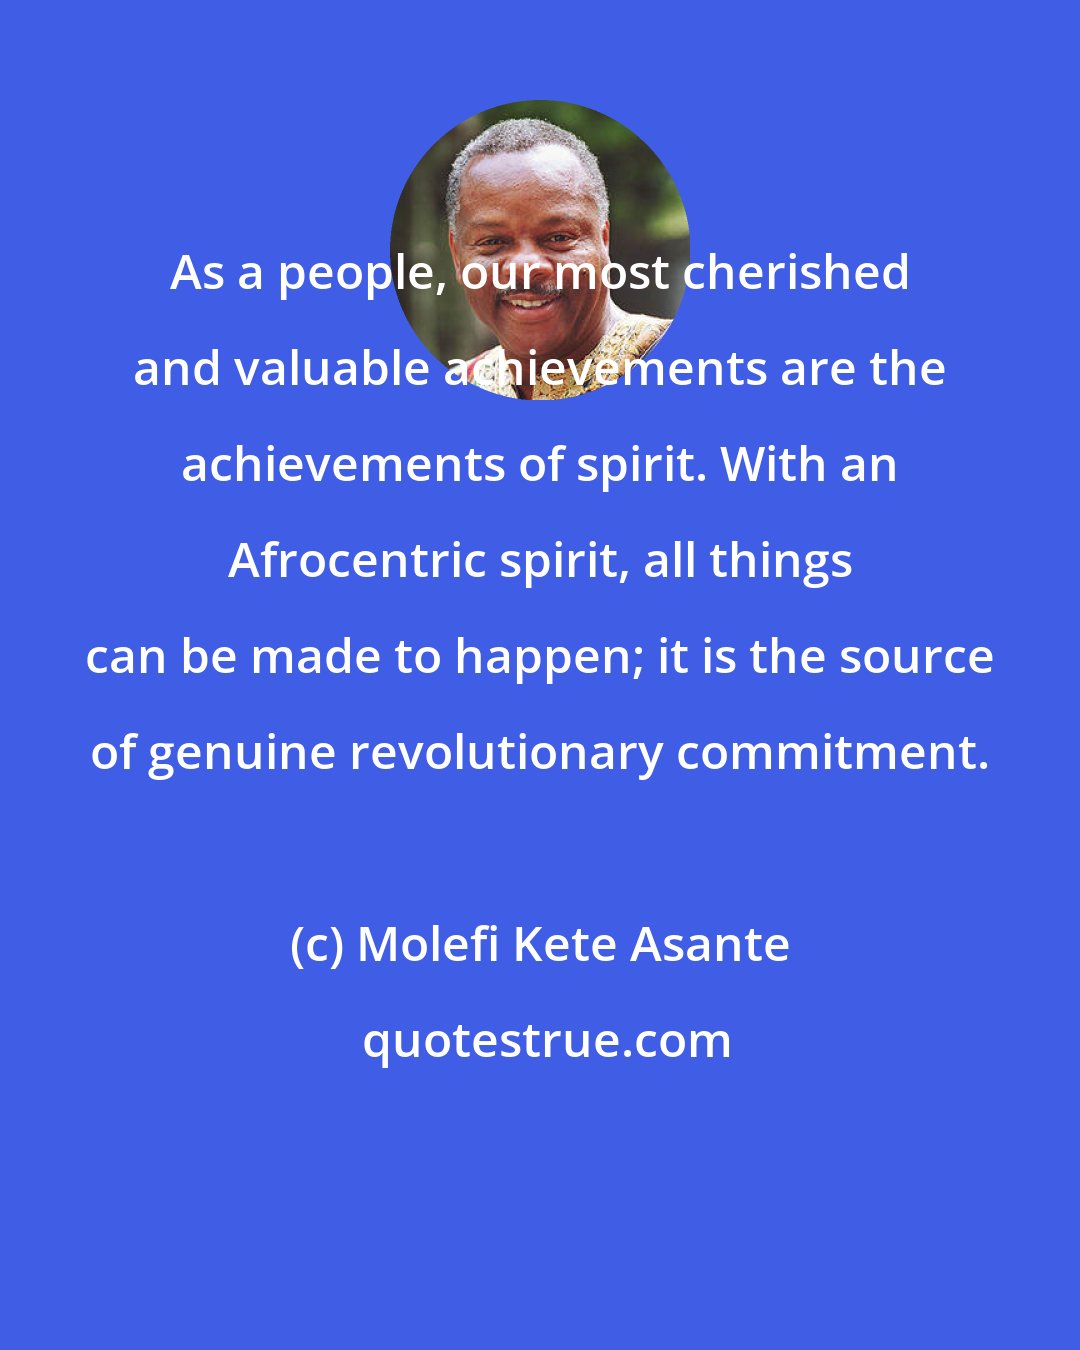 Molefi Kete Asante: As a people, our most cherished and valuable achievements are the achievements of spirit. With an Afrocentric spirit, all things can be made to happen; it is the source of genuine revolutionary commitment.